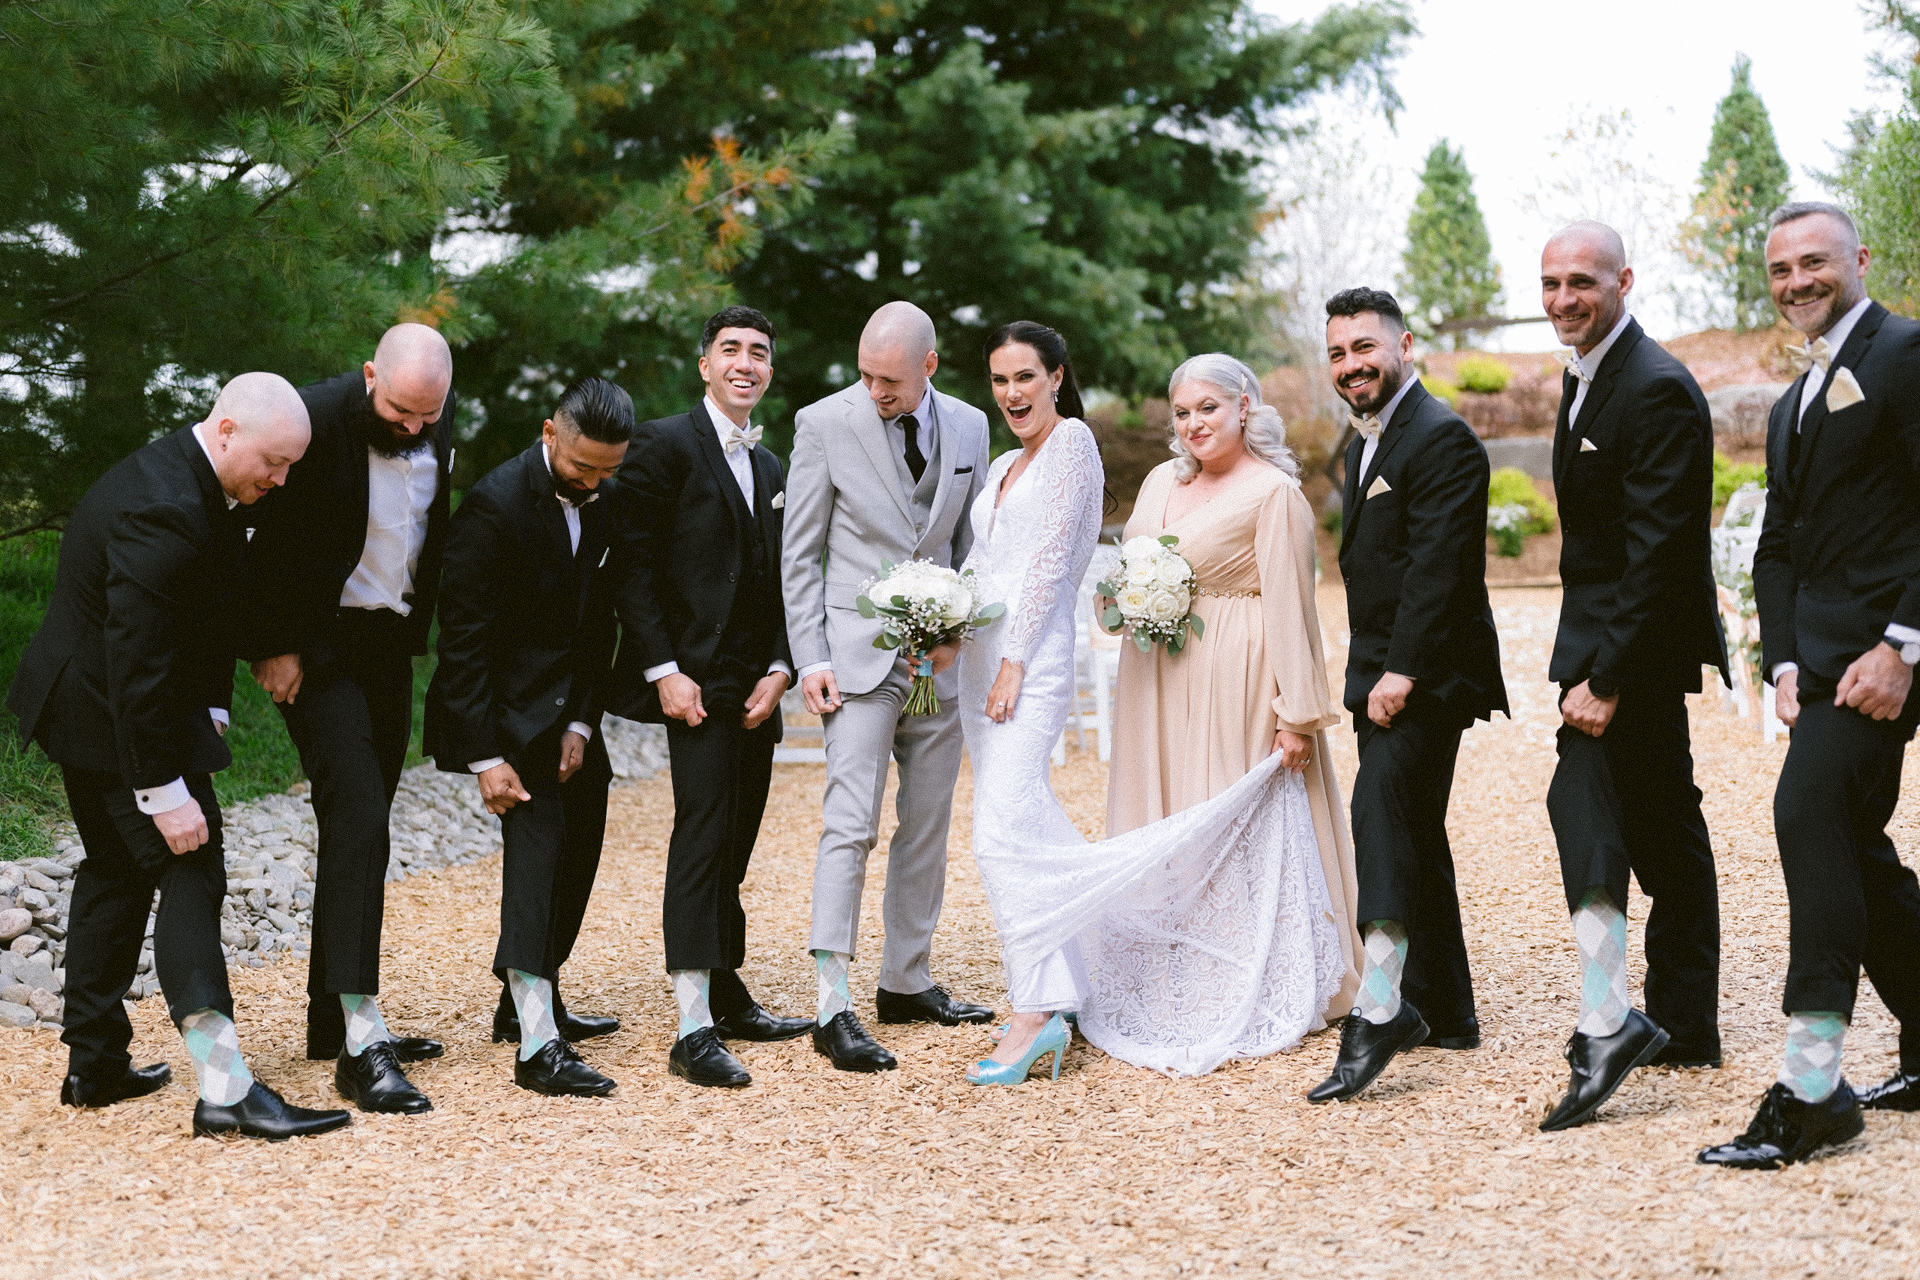 A wedding party posing whimsically with the bride and groom in the center, surrounded by groomsmen and a bridesmaid showcasing their socks and shoes.